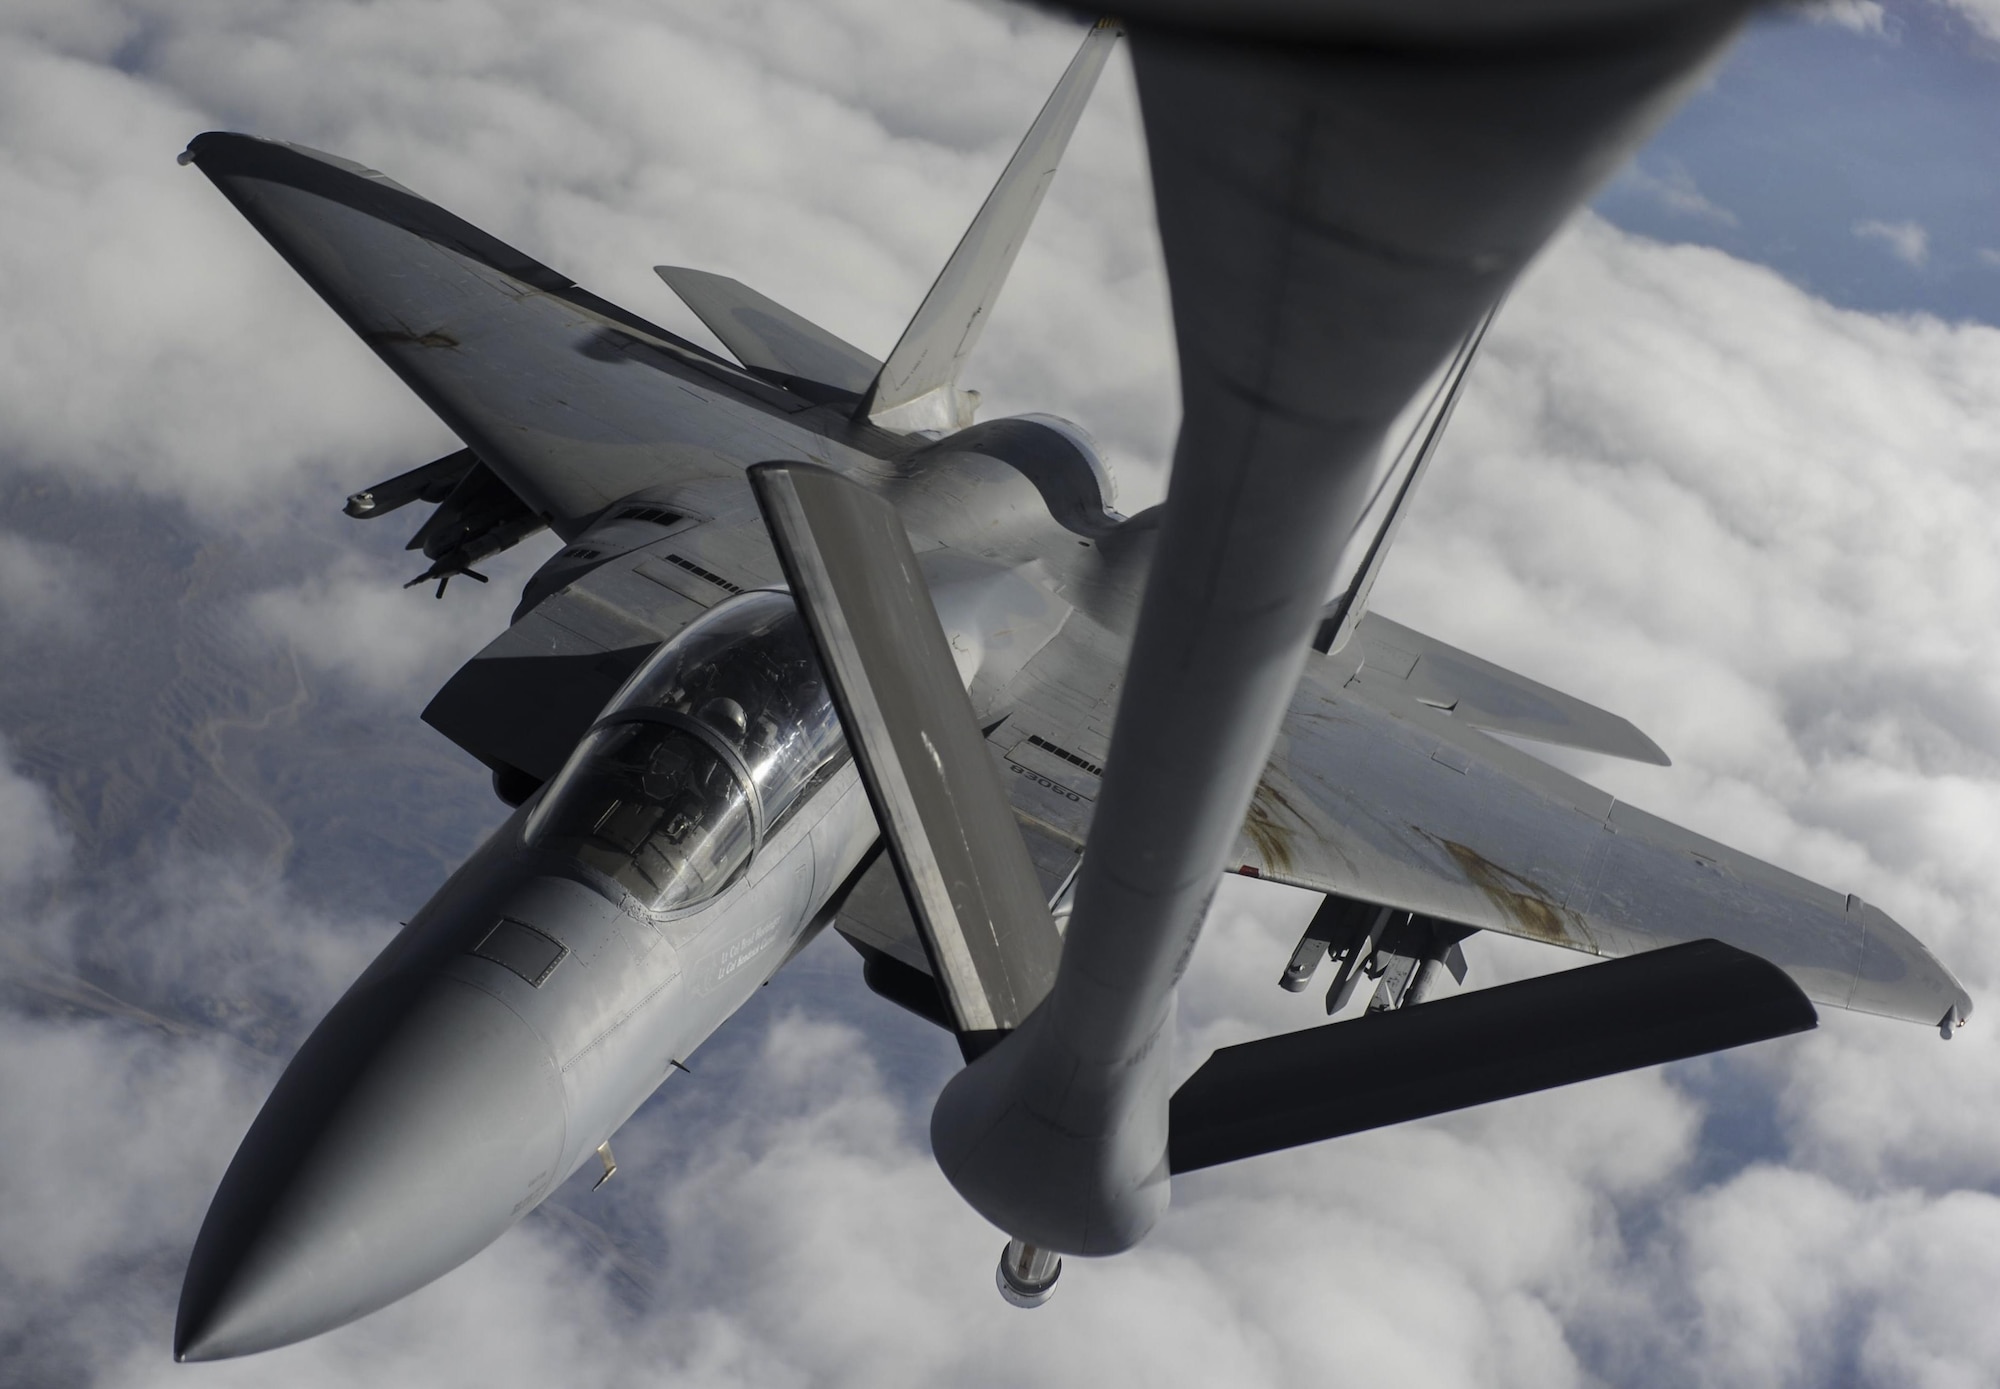 An F-15 fighter jet, assigned to the 433rd Weapons Squadron, at Nellis Air Force Base, Nevada, prepares for aerial refueling over the Nevada Test and Training Range, Nev., July 10, 2017. The United States Air Force Weapons School teaches graduate-level instructor courses that provide the world's most advanced training in weapons and tactics employment to officers of the combat air forces and mobility air forces. (U.S. Air Force photo by Senior Airman Kevin Tanenbaum/Released)